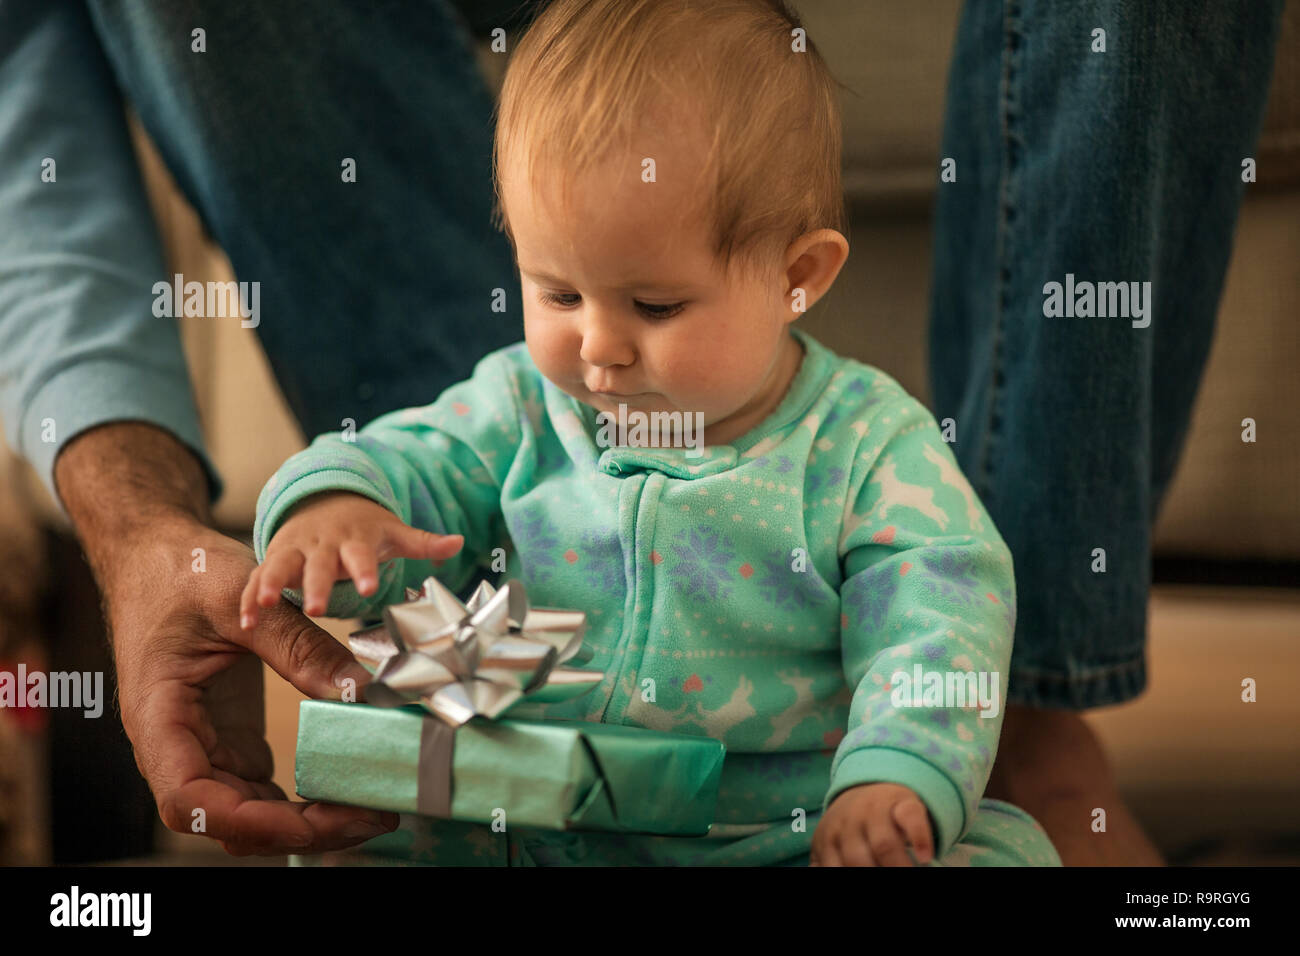 Baby girl opening a present from her father. Stock Photo